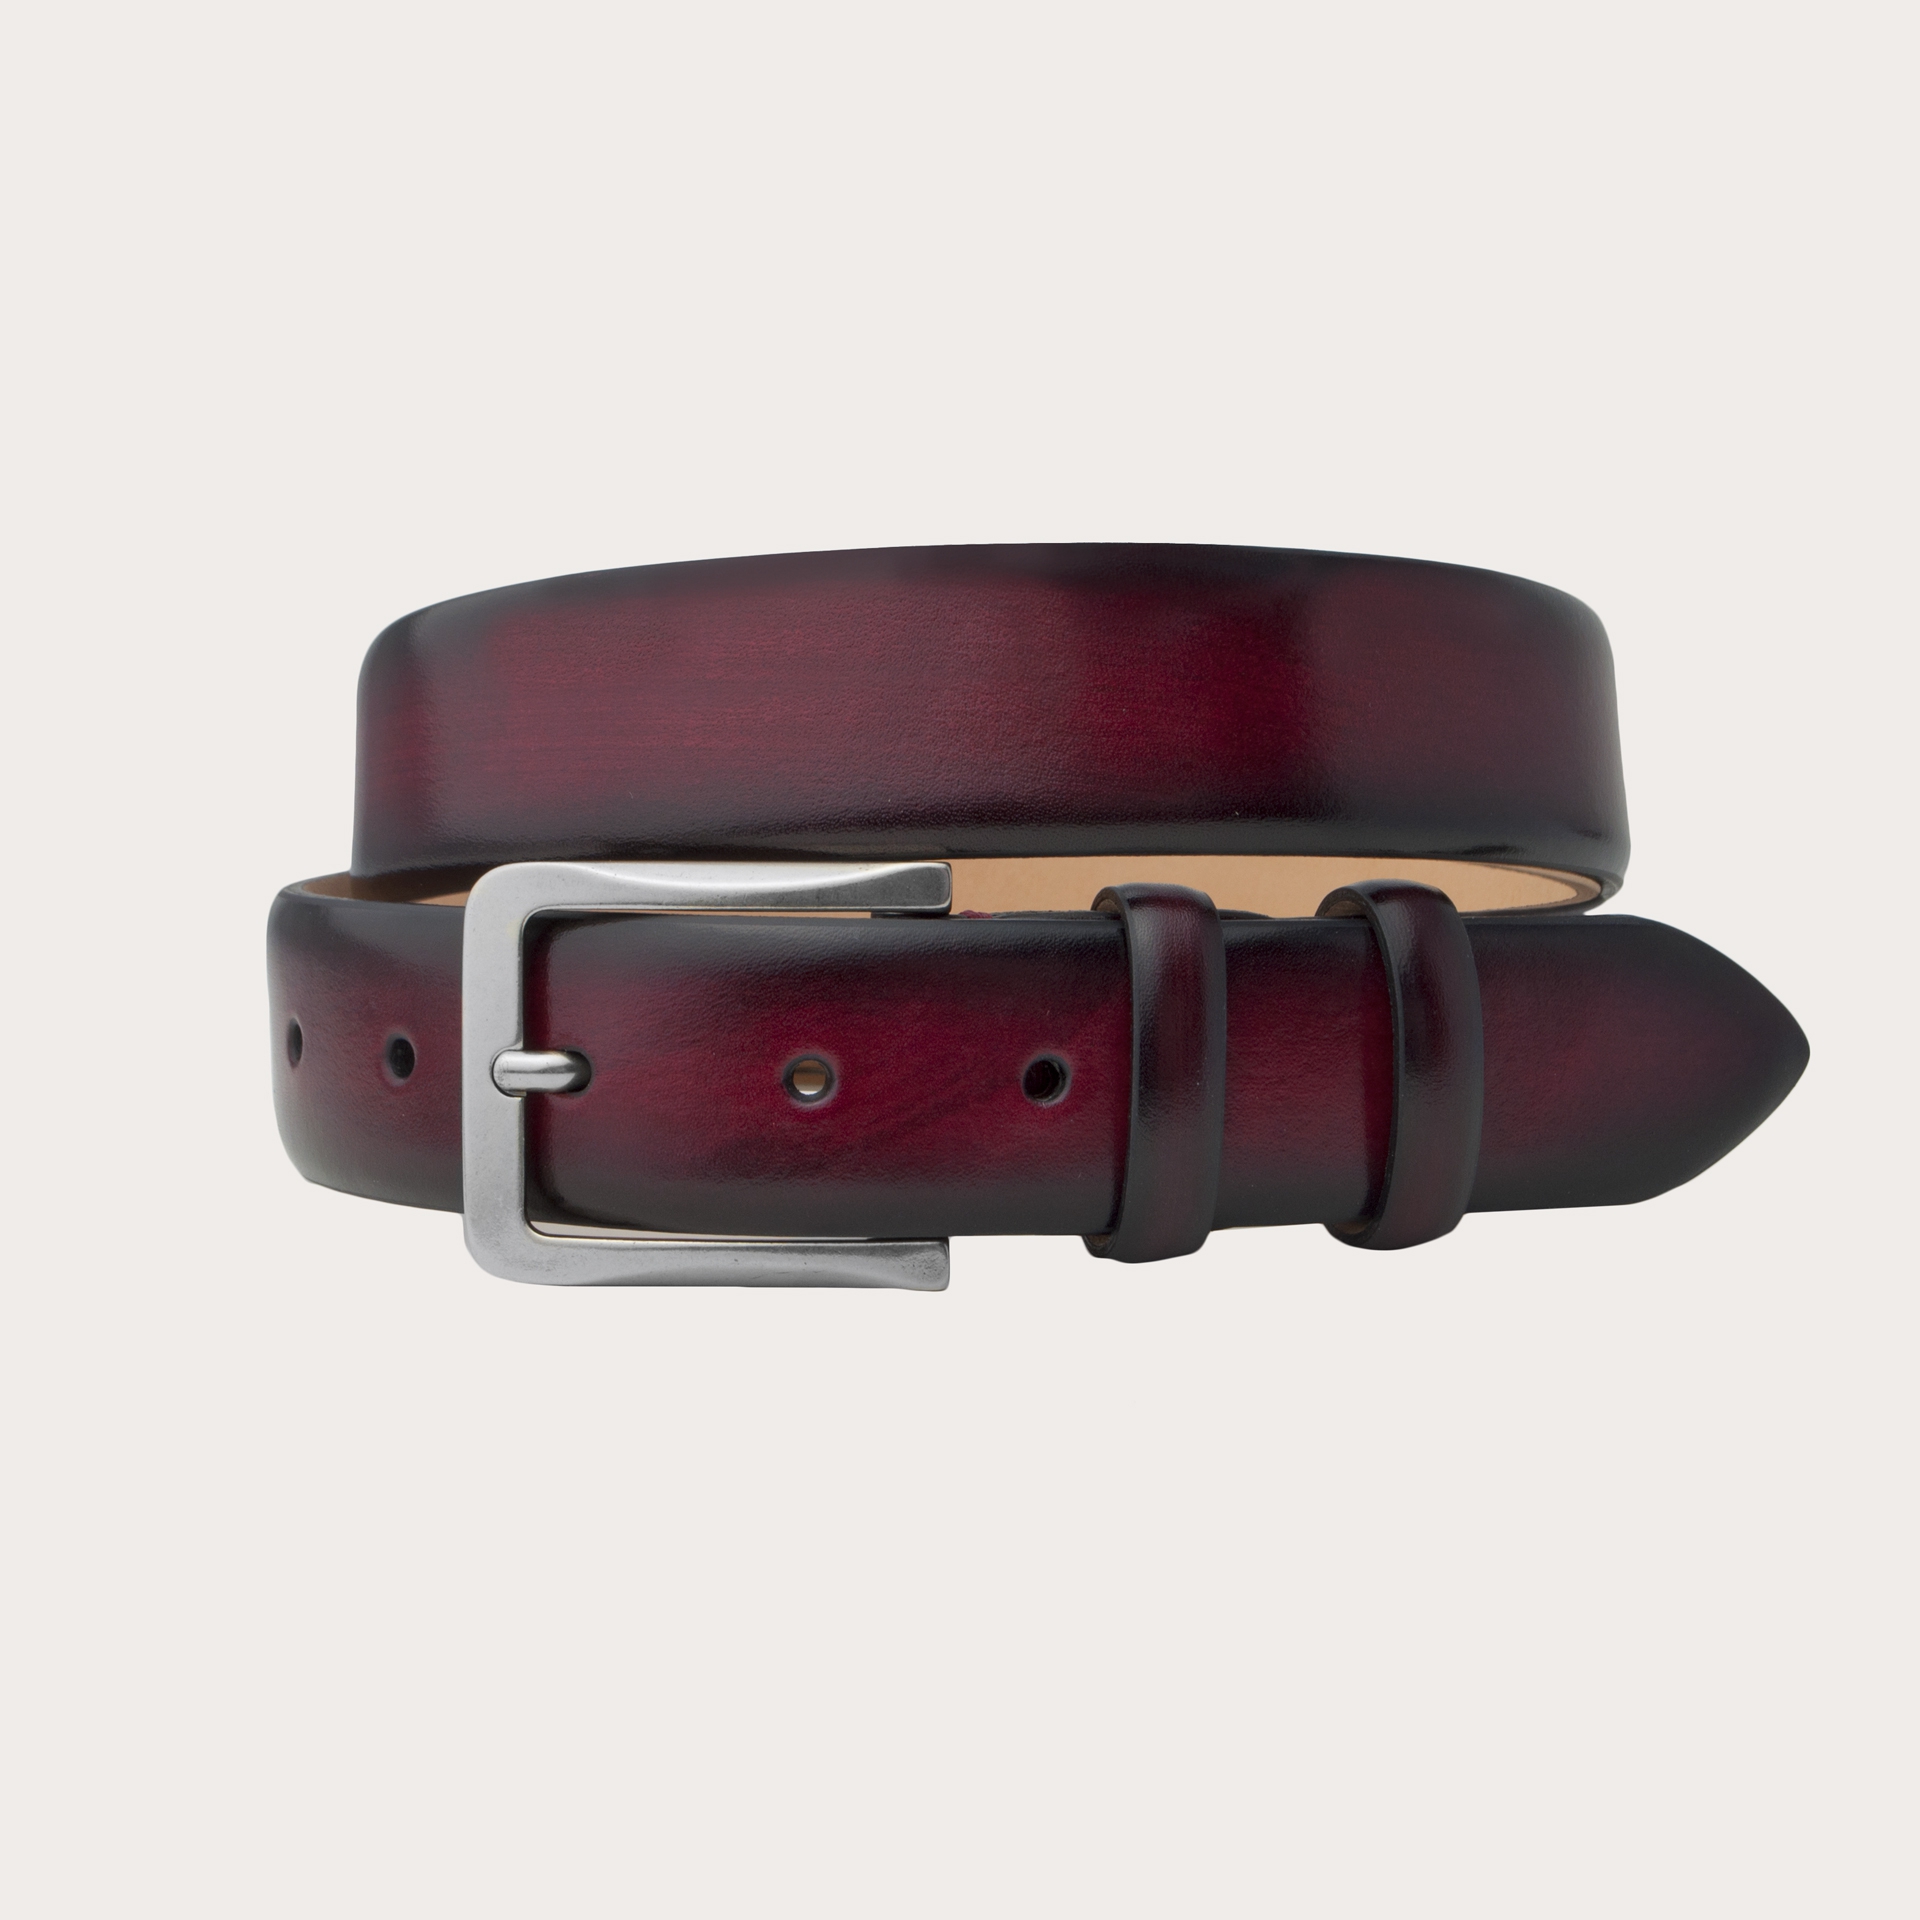 Reversible belt in burgundy saffiano and black leather